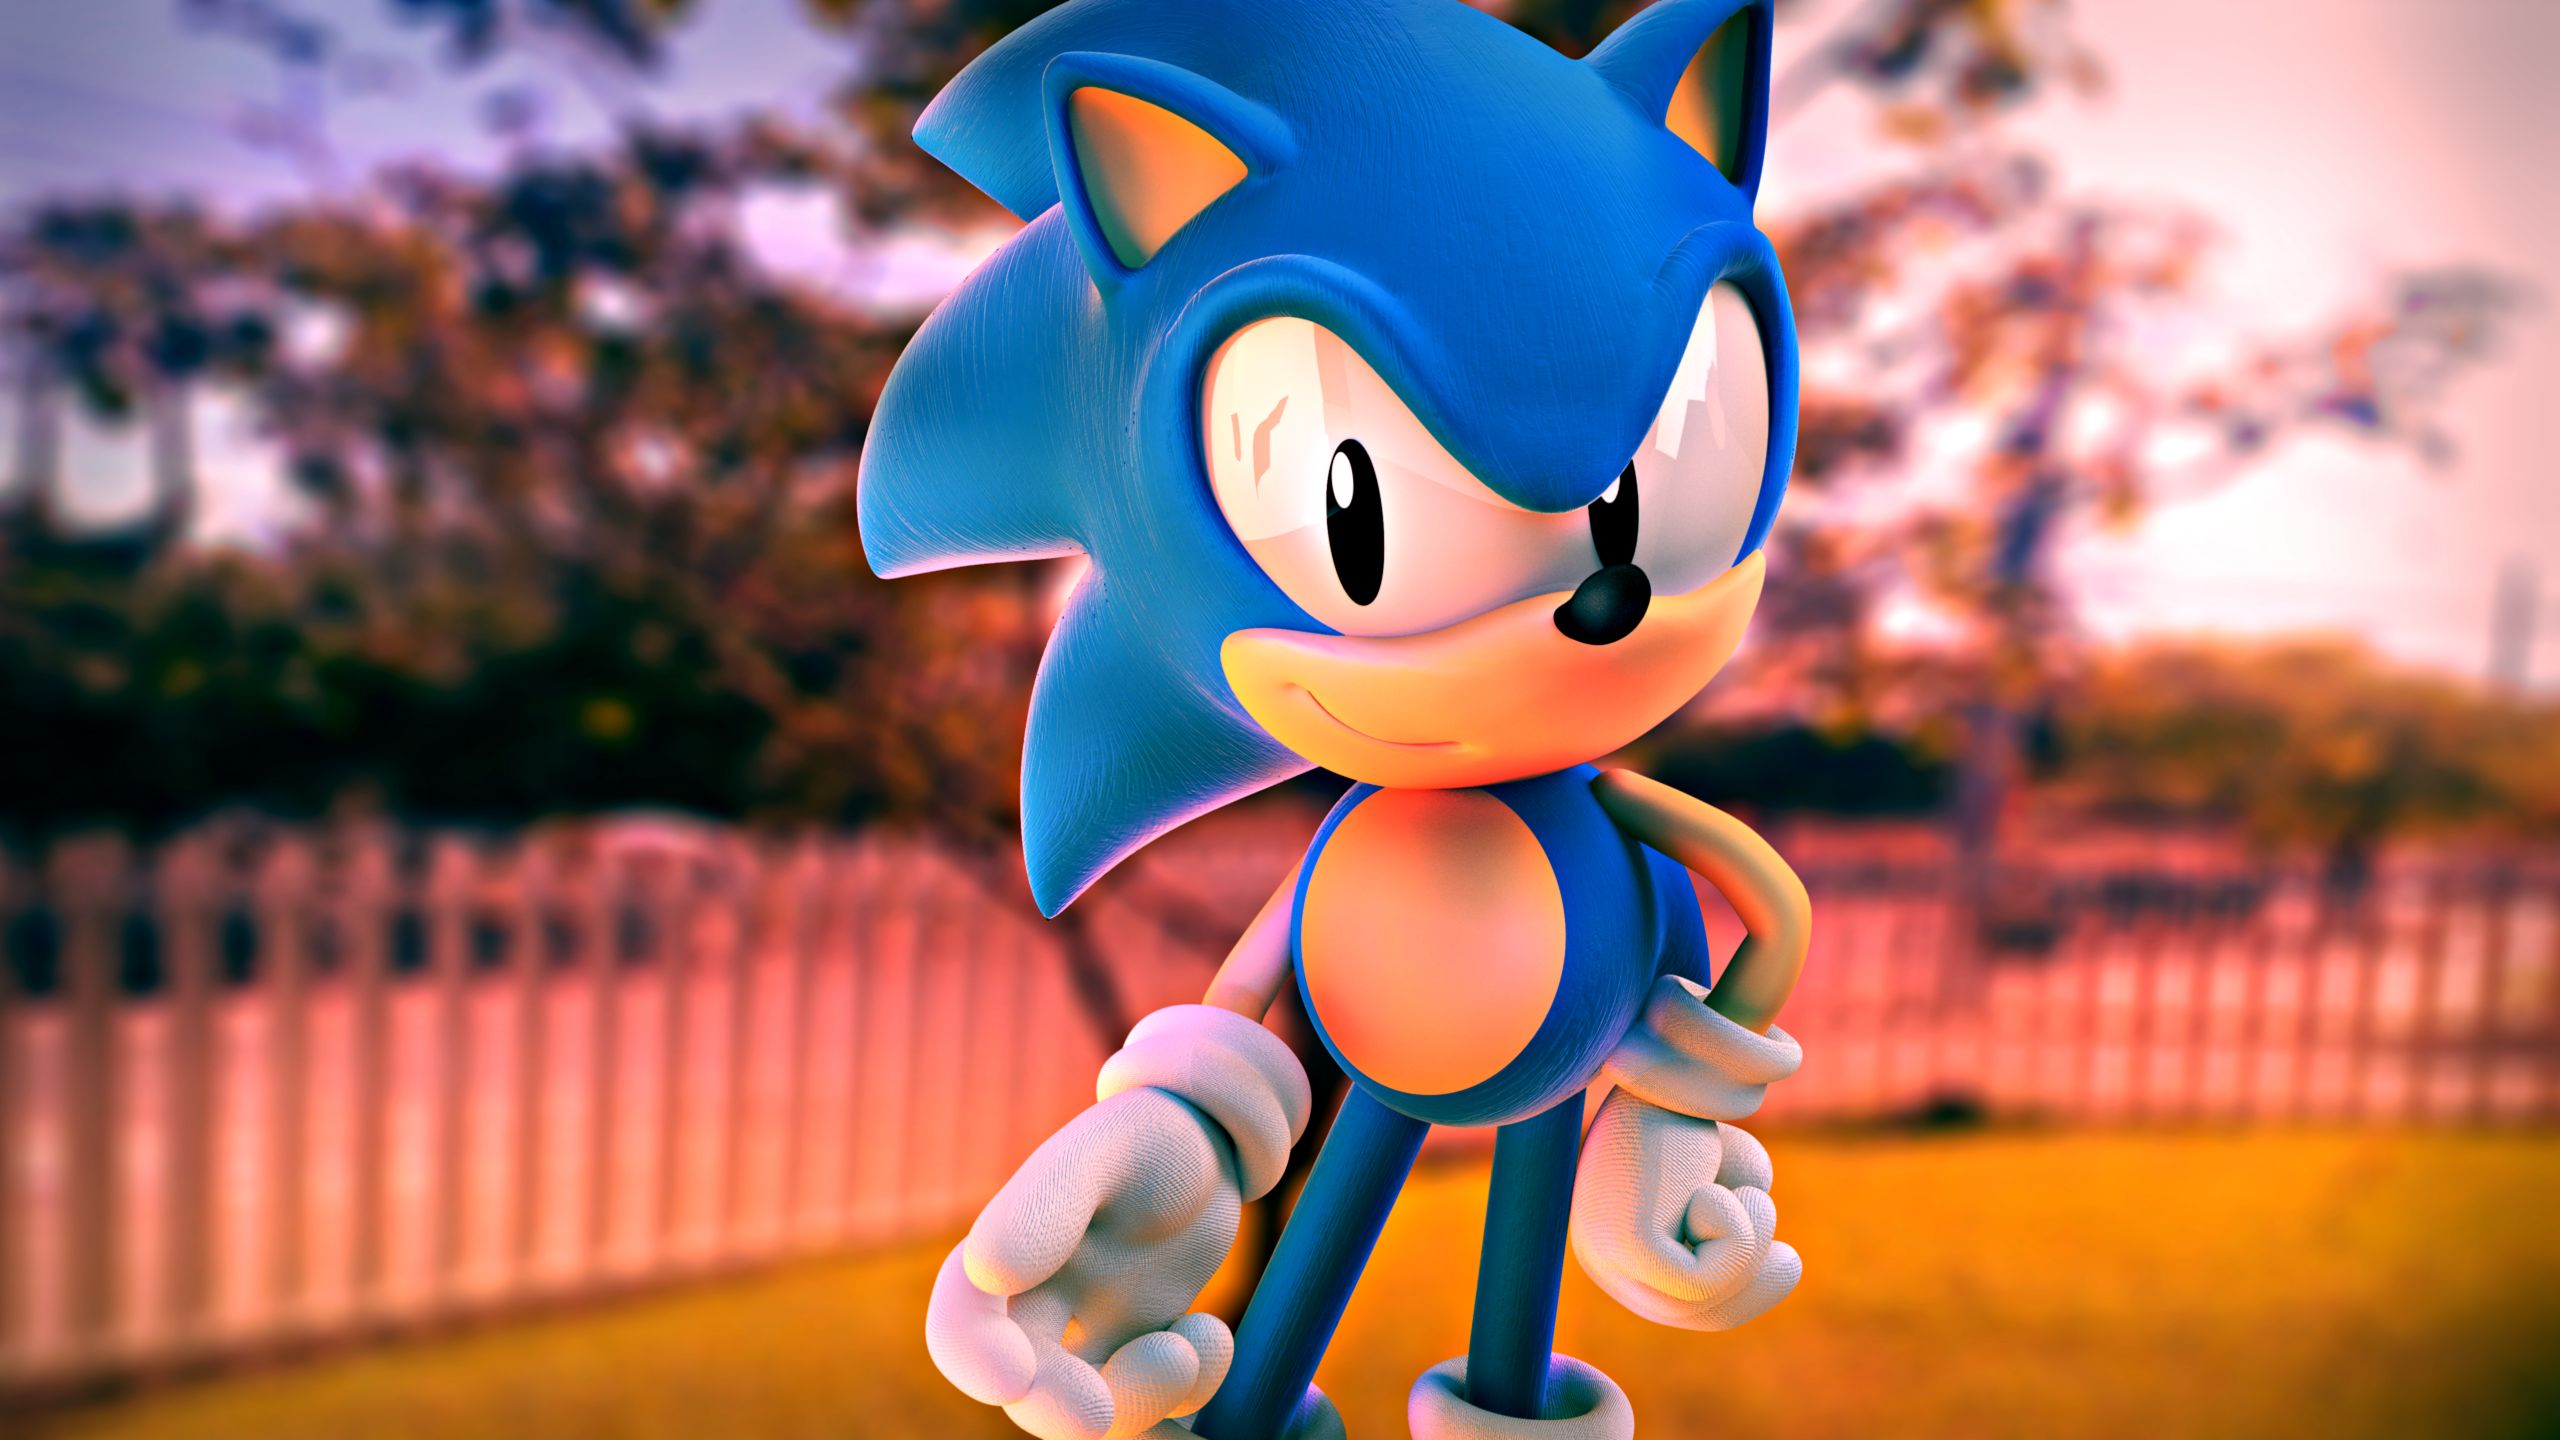 video game, sonic the hedgehog 3, classic sonic, sonic the hedgehog, sonic cell phone wallpapers